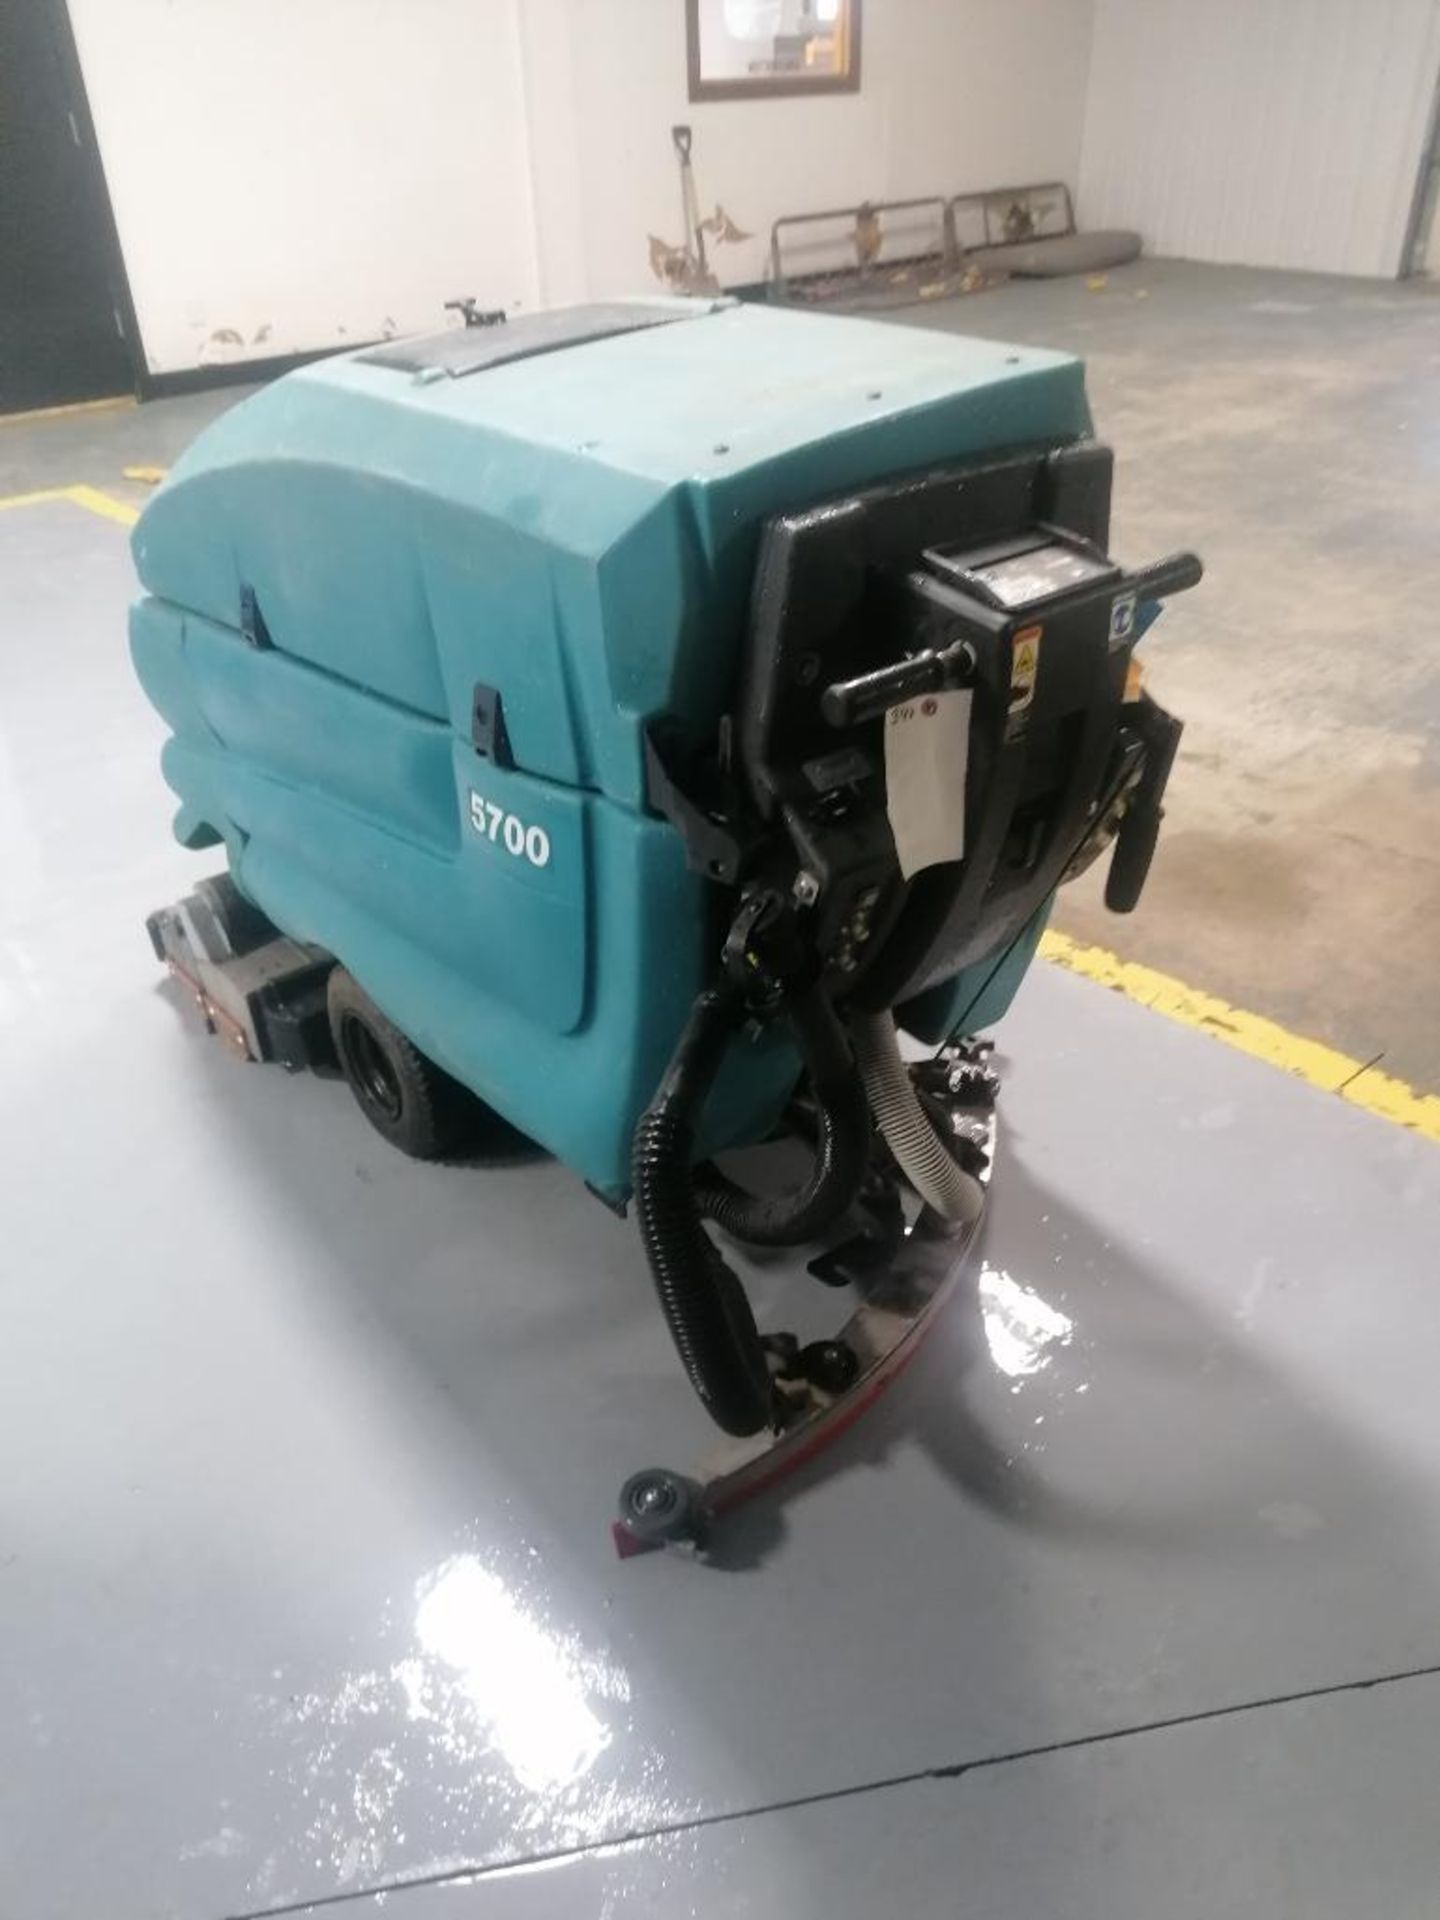 Tennant 5700 Floor Scrubber, Serial #15394, 36 V. Located in Mt. Pleasant, IA. - Image 5 of 16